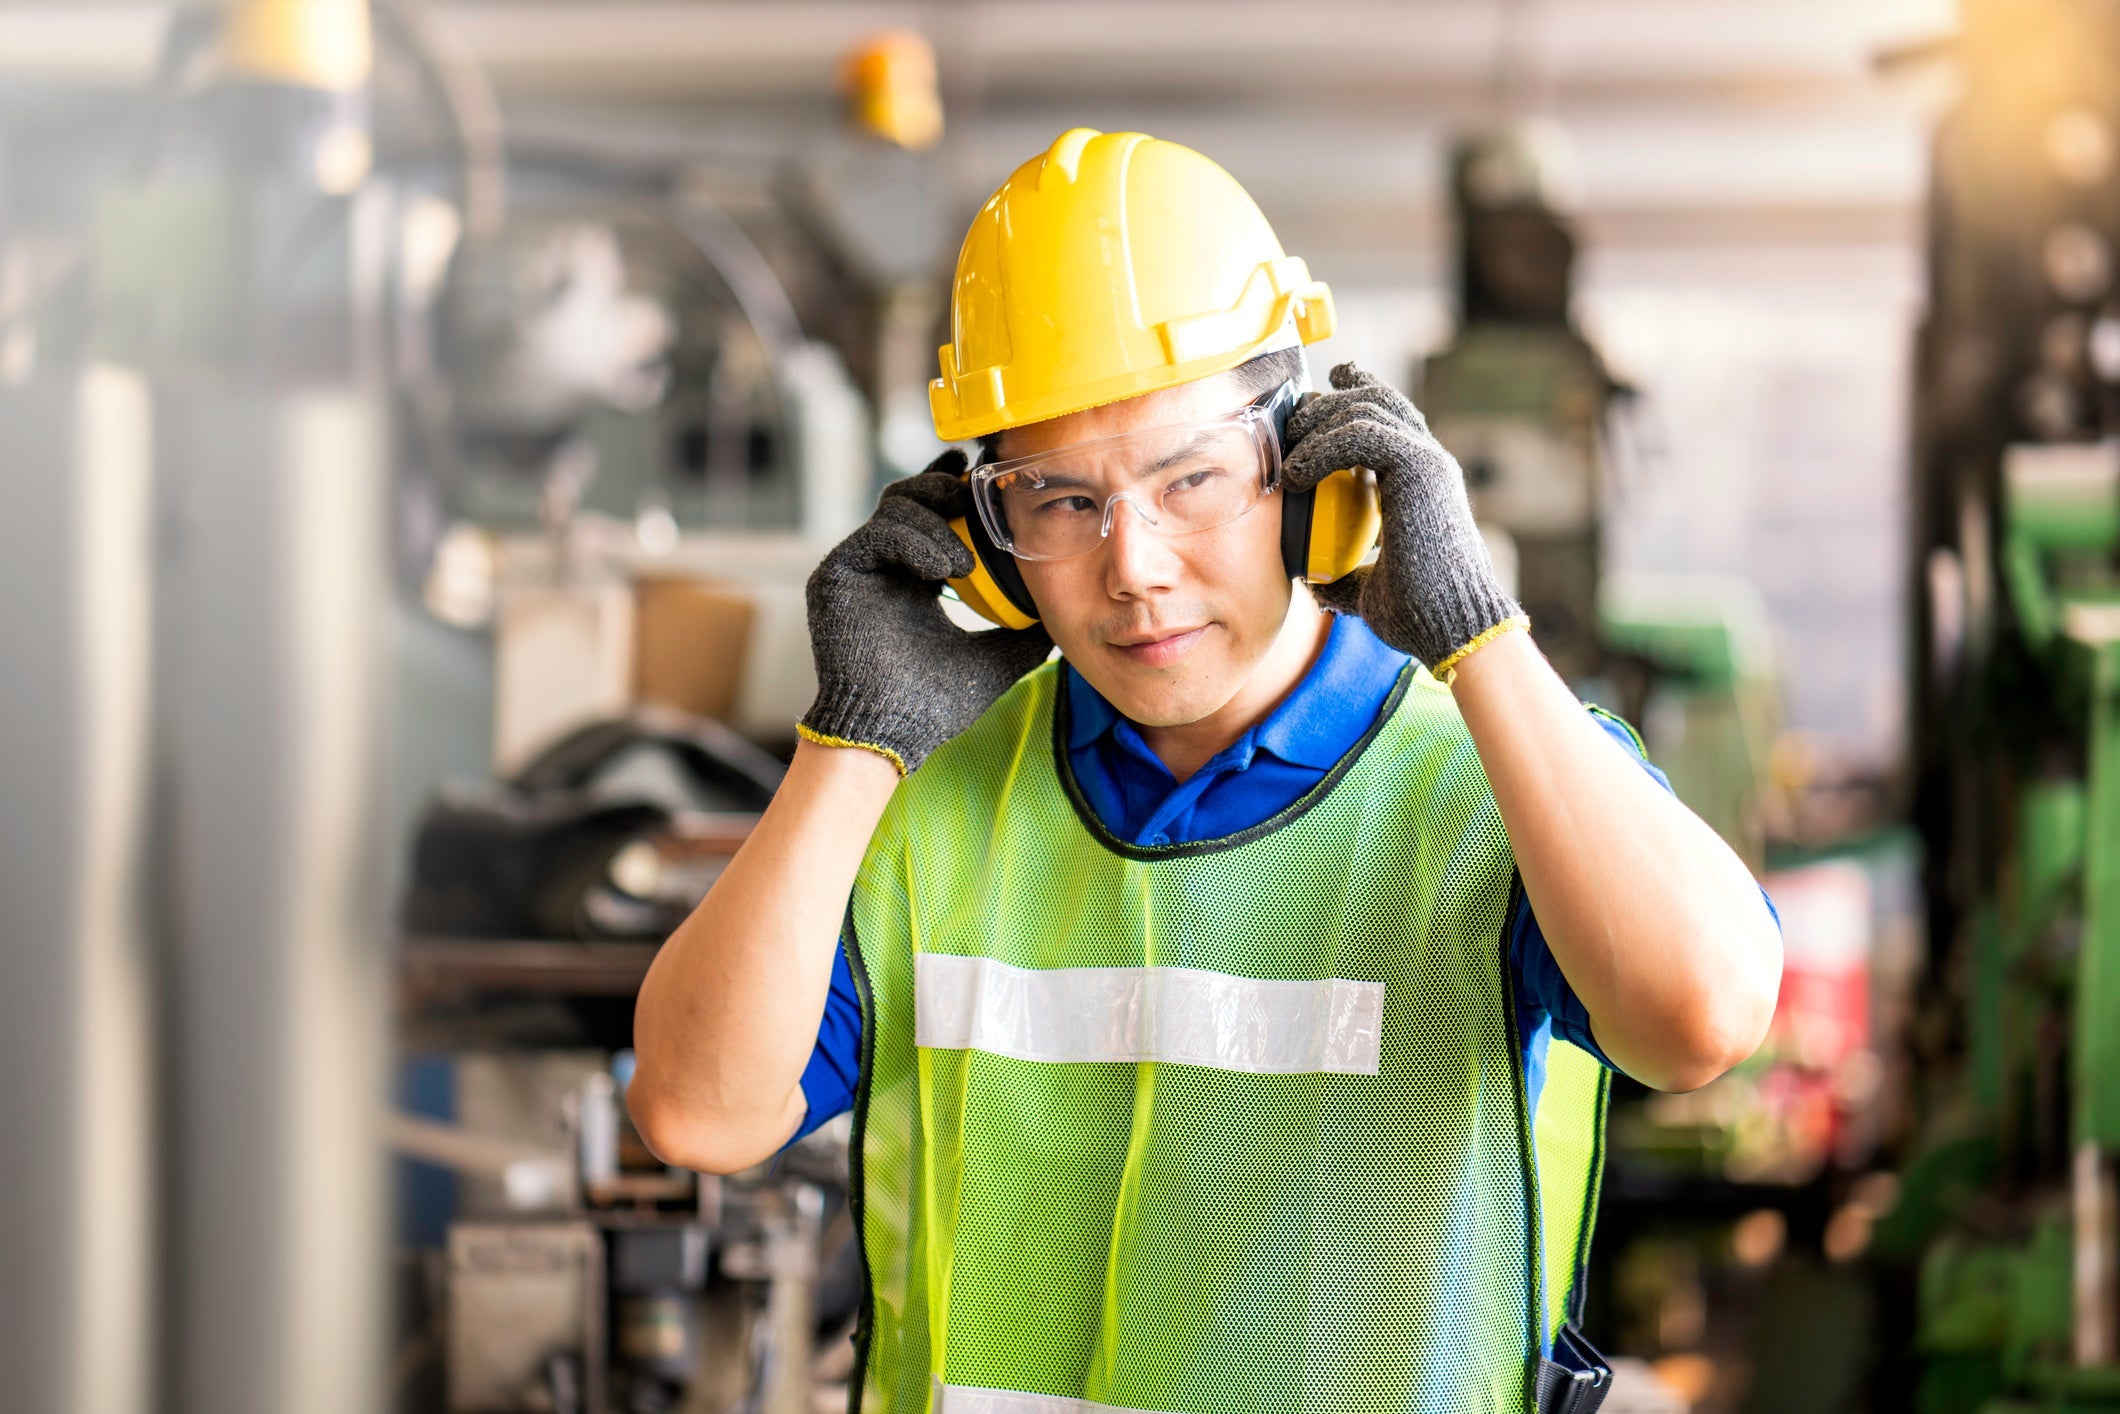 Reasons to wear hearing protection in load work spaces-eSafety Supplies, Inc